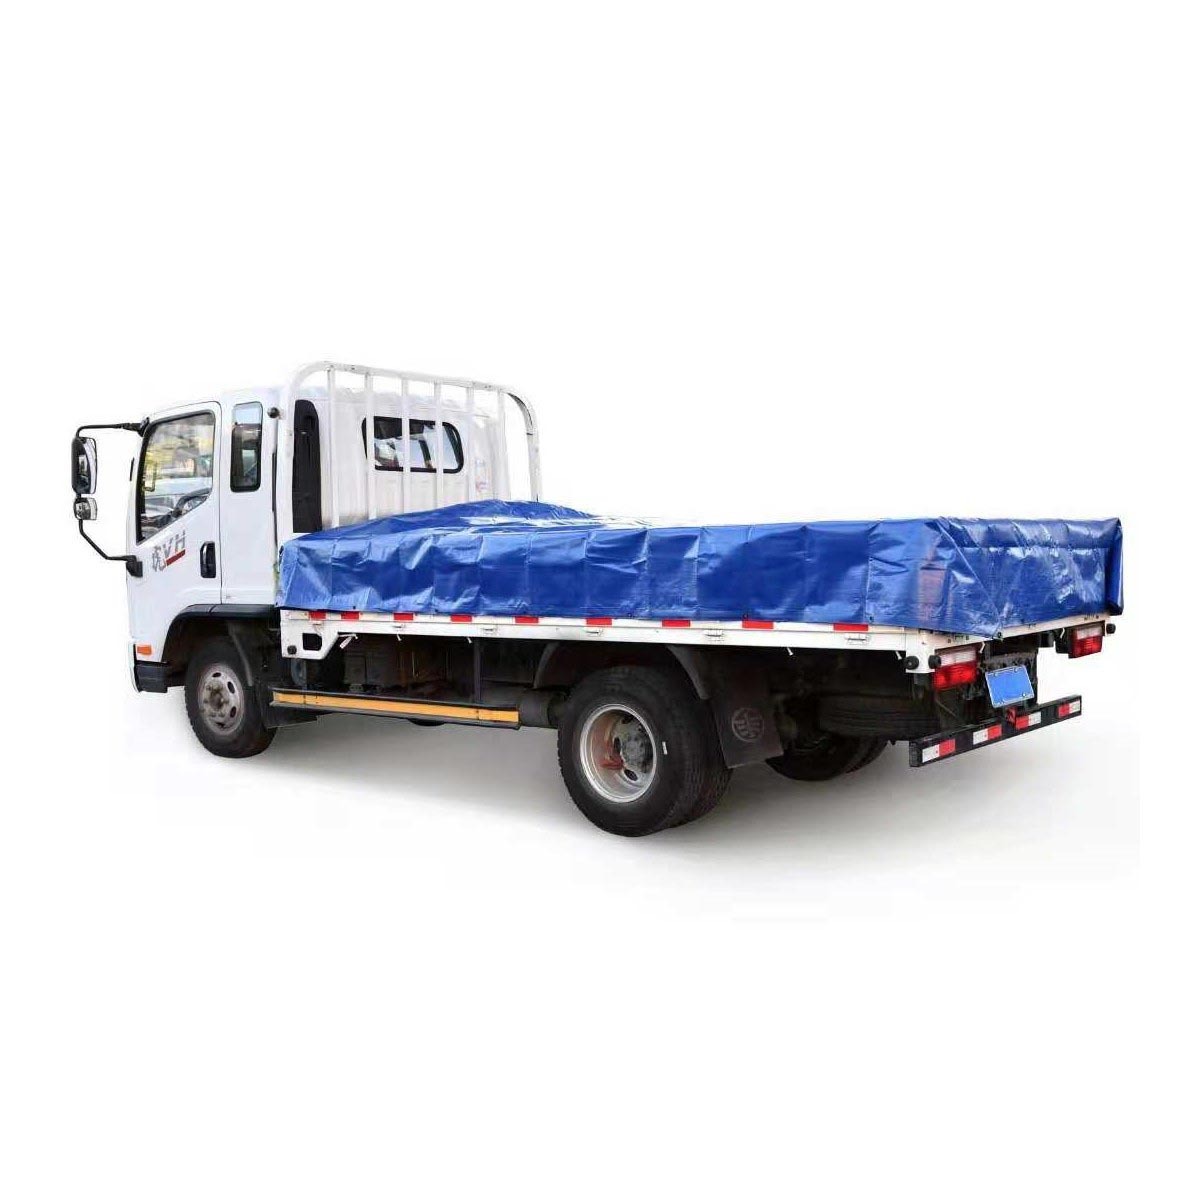 Cut out image of tarp being used on truck on white background